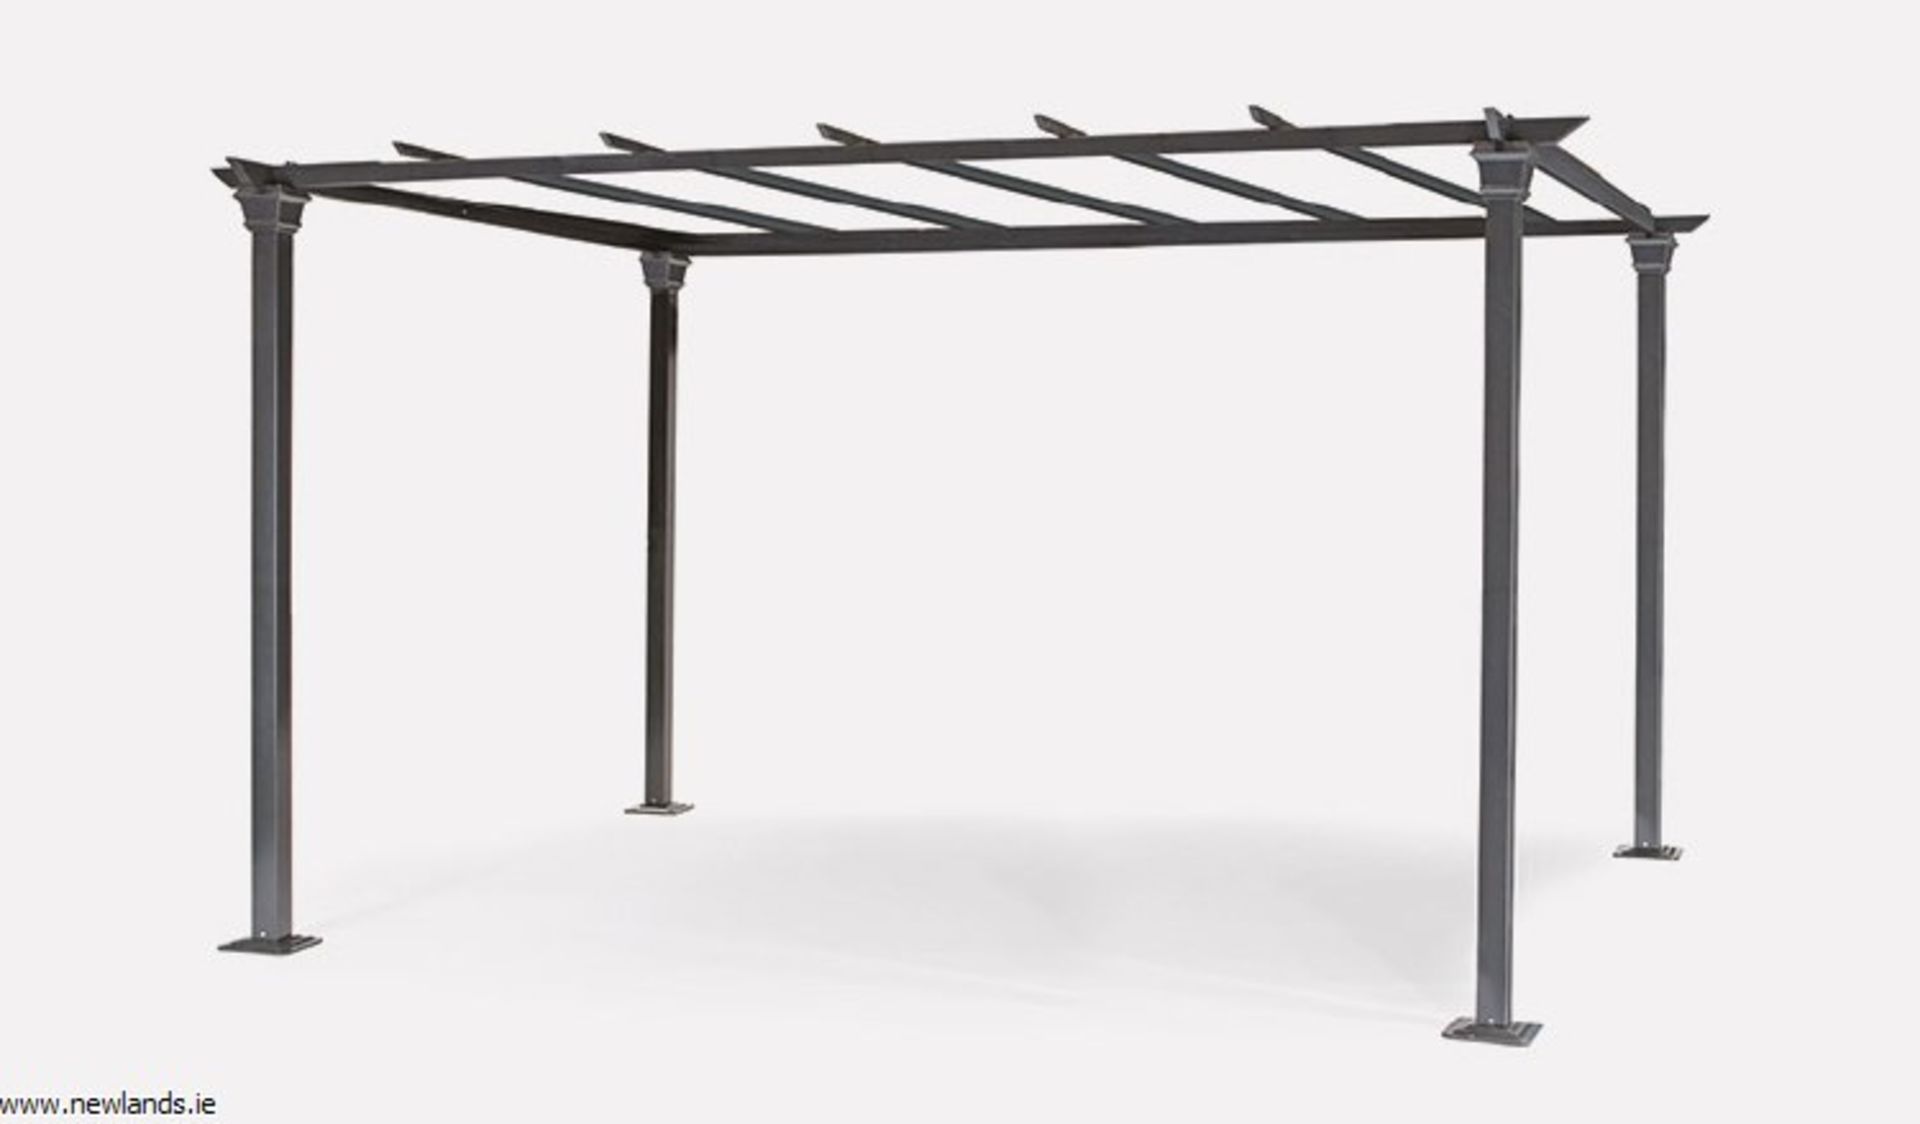 V Brand New 3m x 4m Aluminium Charcoal Grey Pergola With Zipped Cover - Sturdy Design And Folds Back